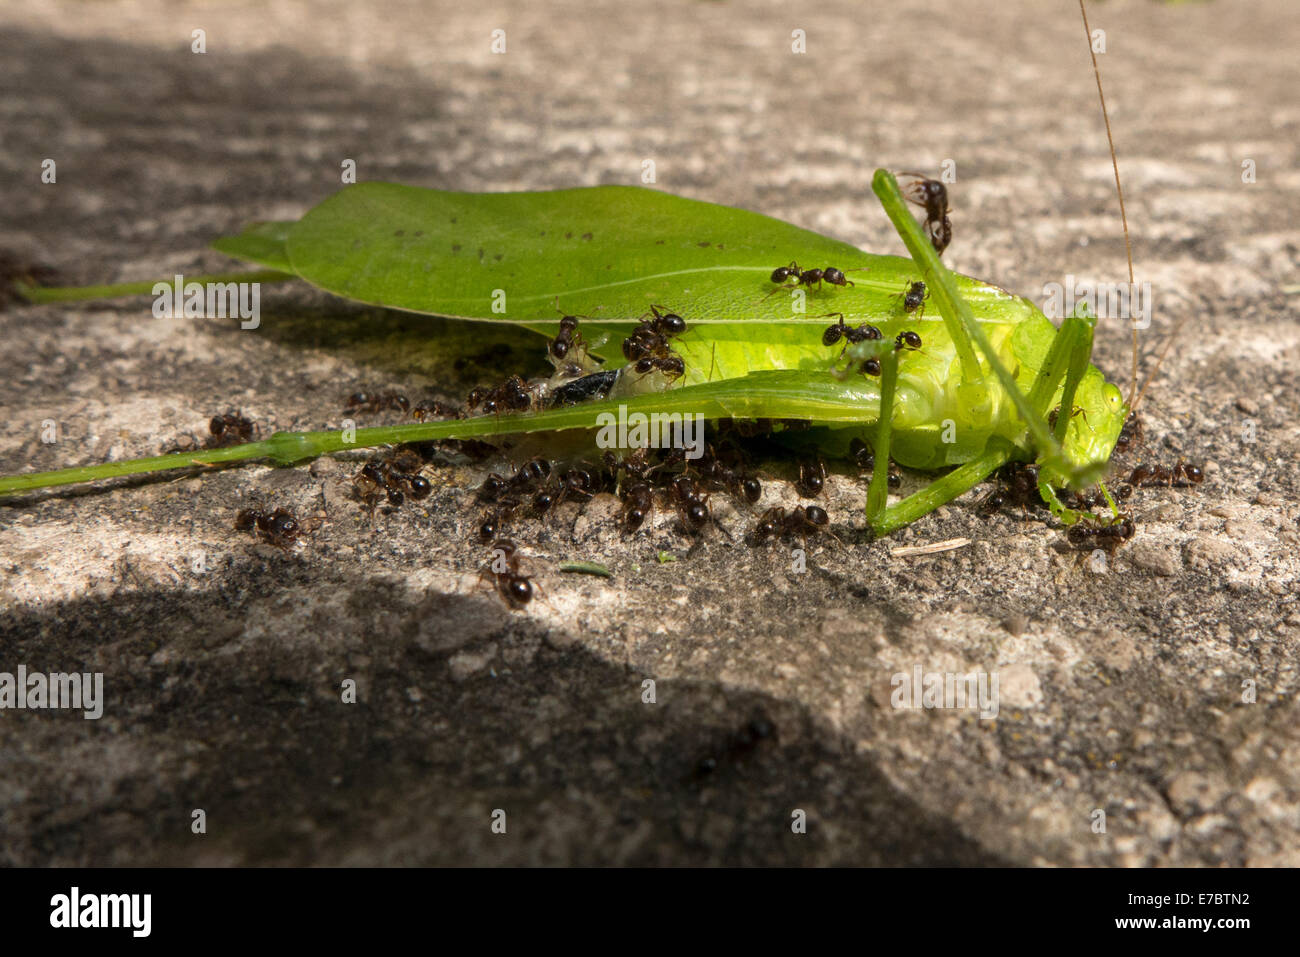 Tiny ants consuming large insect. Stock Photo